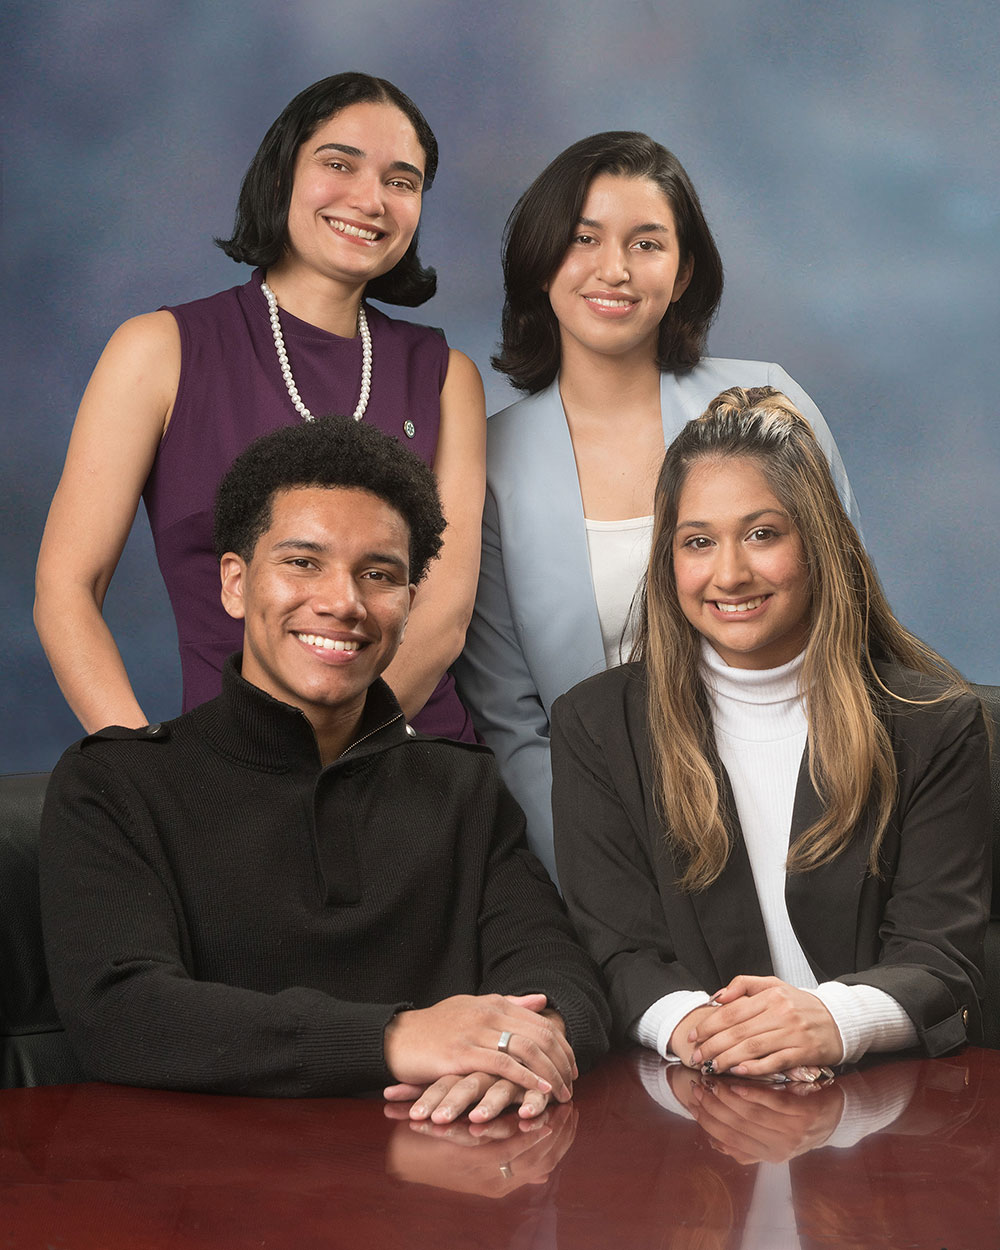 Portrait photo of student trustees Adriana Dos Santo and Ixchel Valencia Diaz standing in back and Diego Bethea and Saigel Ghotra in front